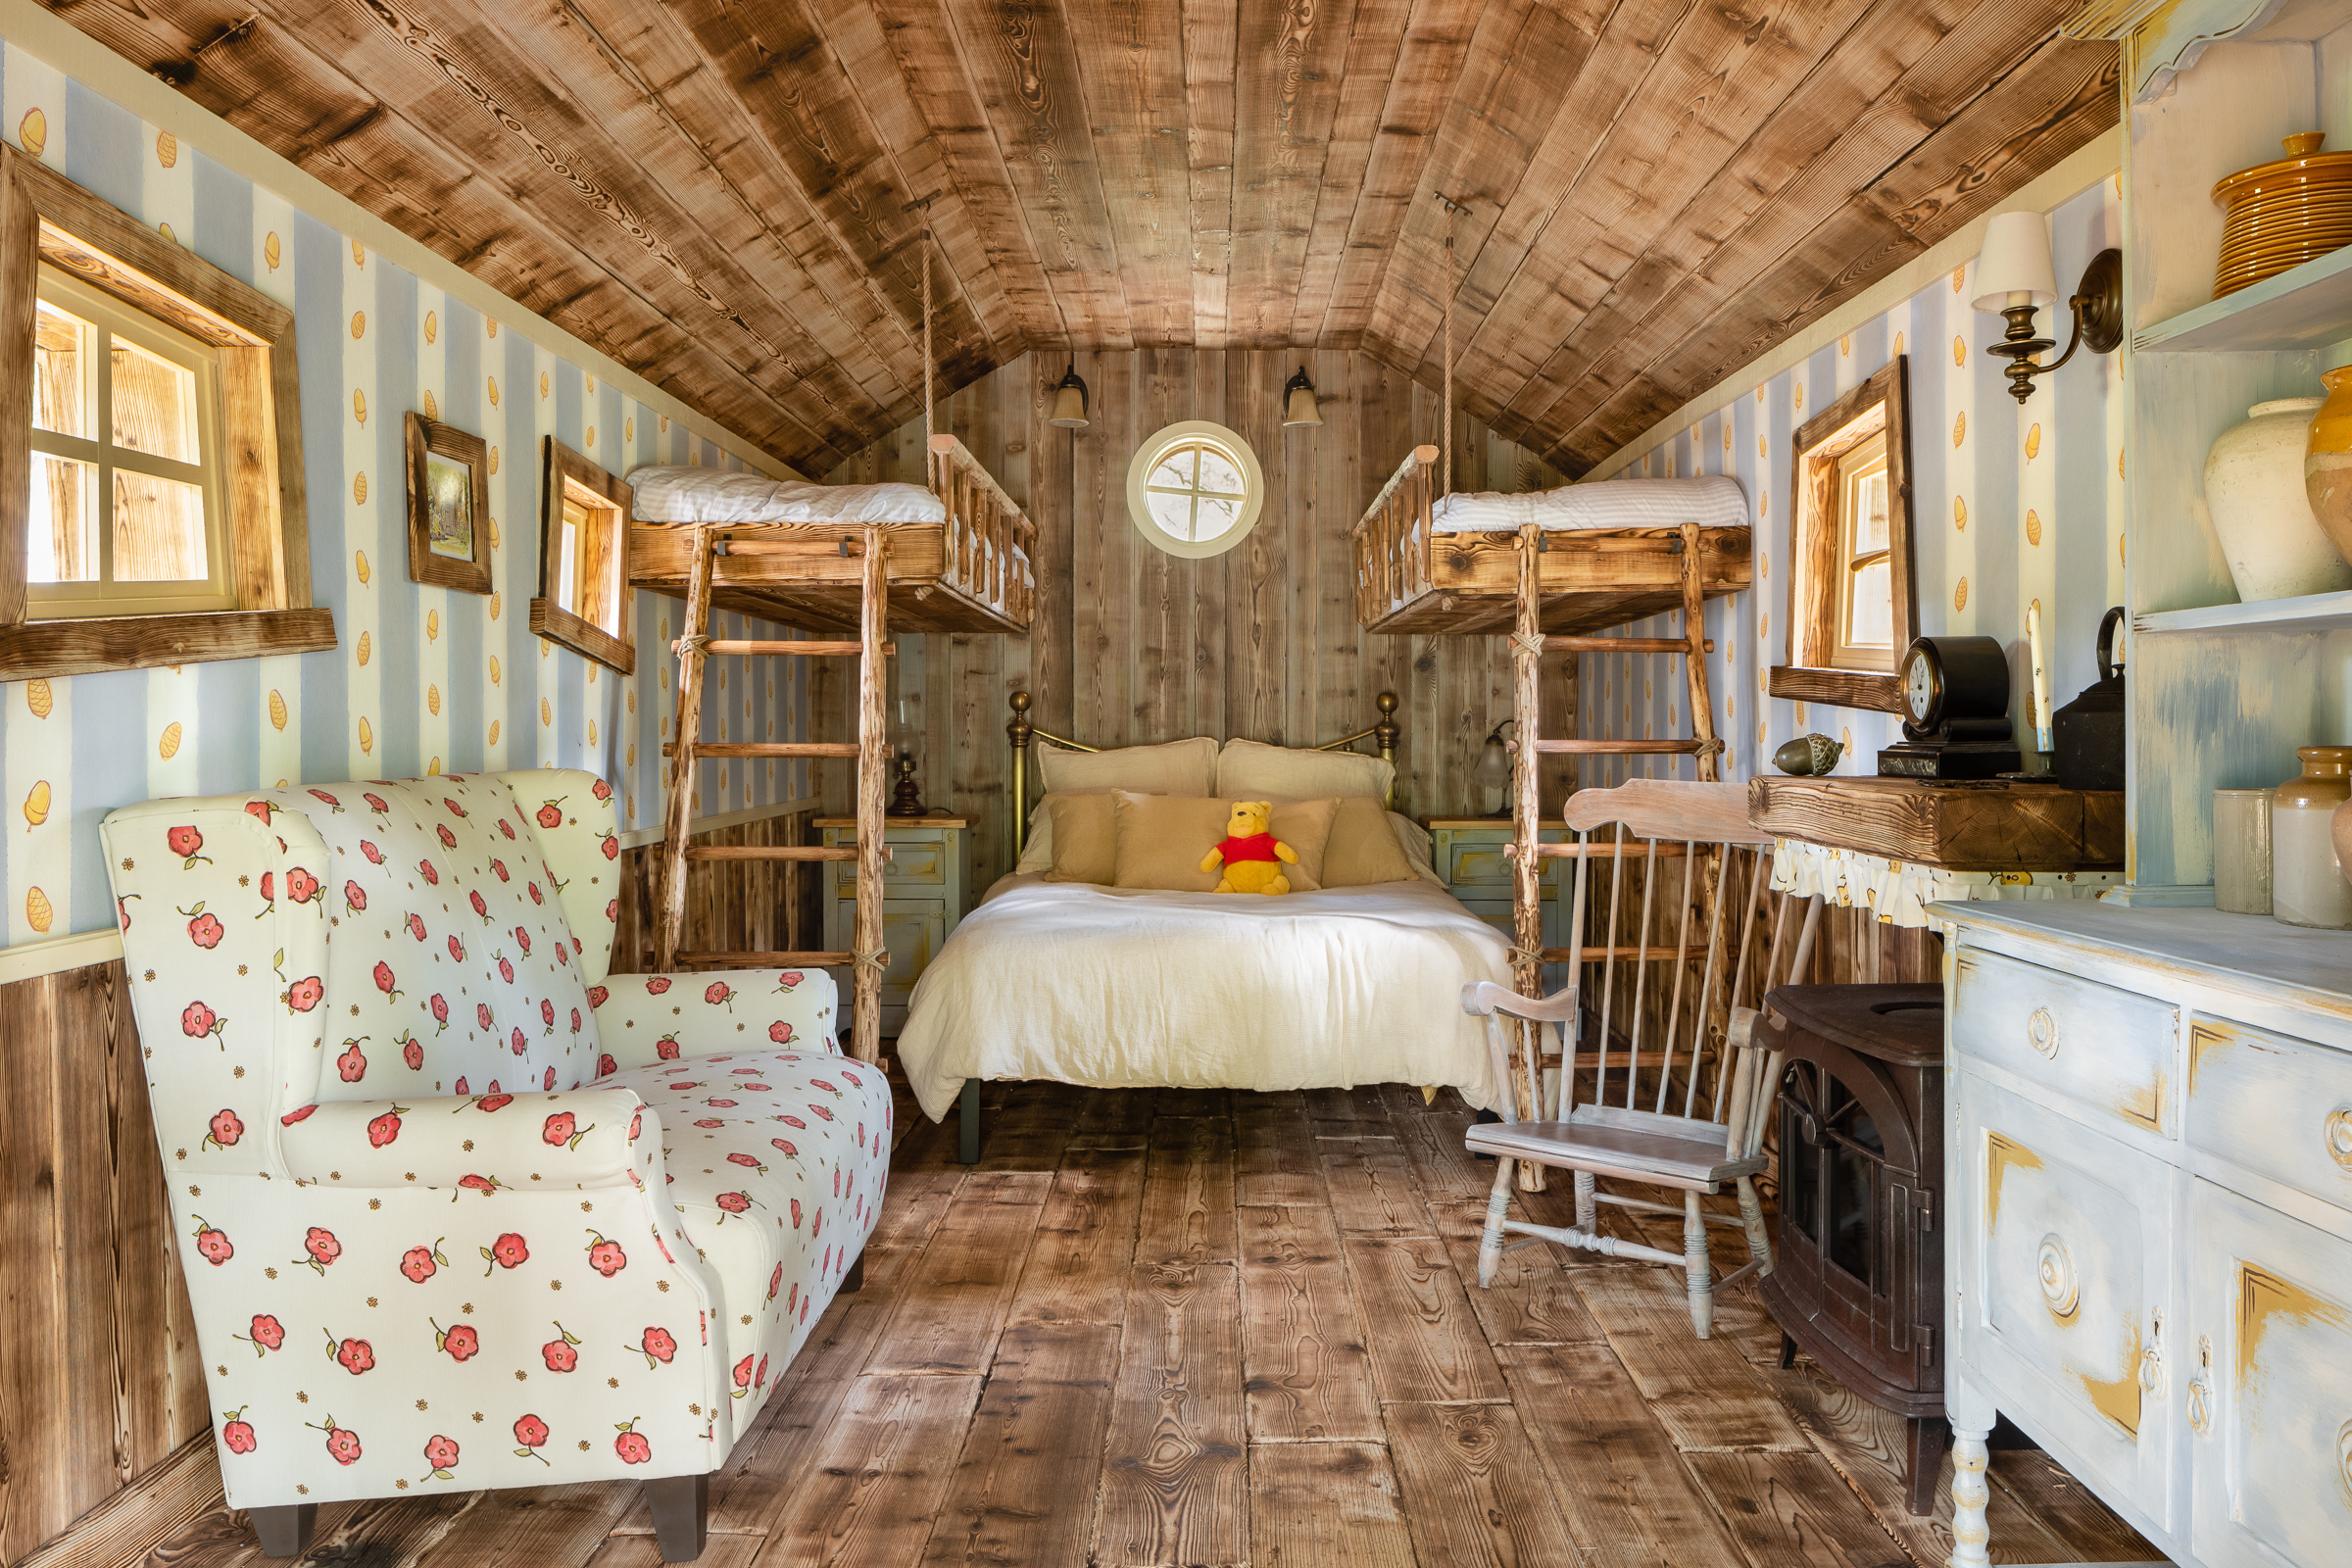 A Winnie the Pooh inspired house in Ashdown Forest, the original Hundred Acre Wood, is available to book on Airbnb as part of Disney’s 95th Anniversary celebrations